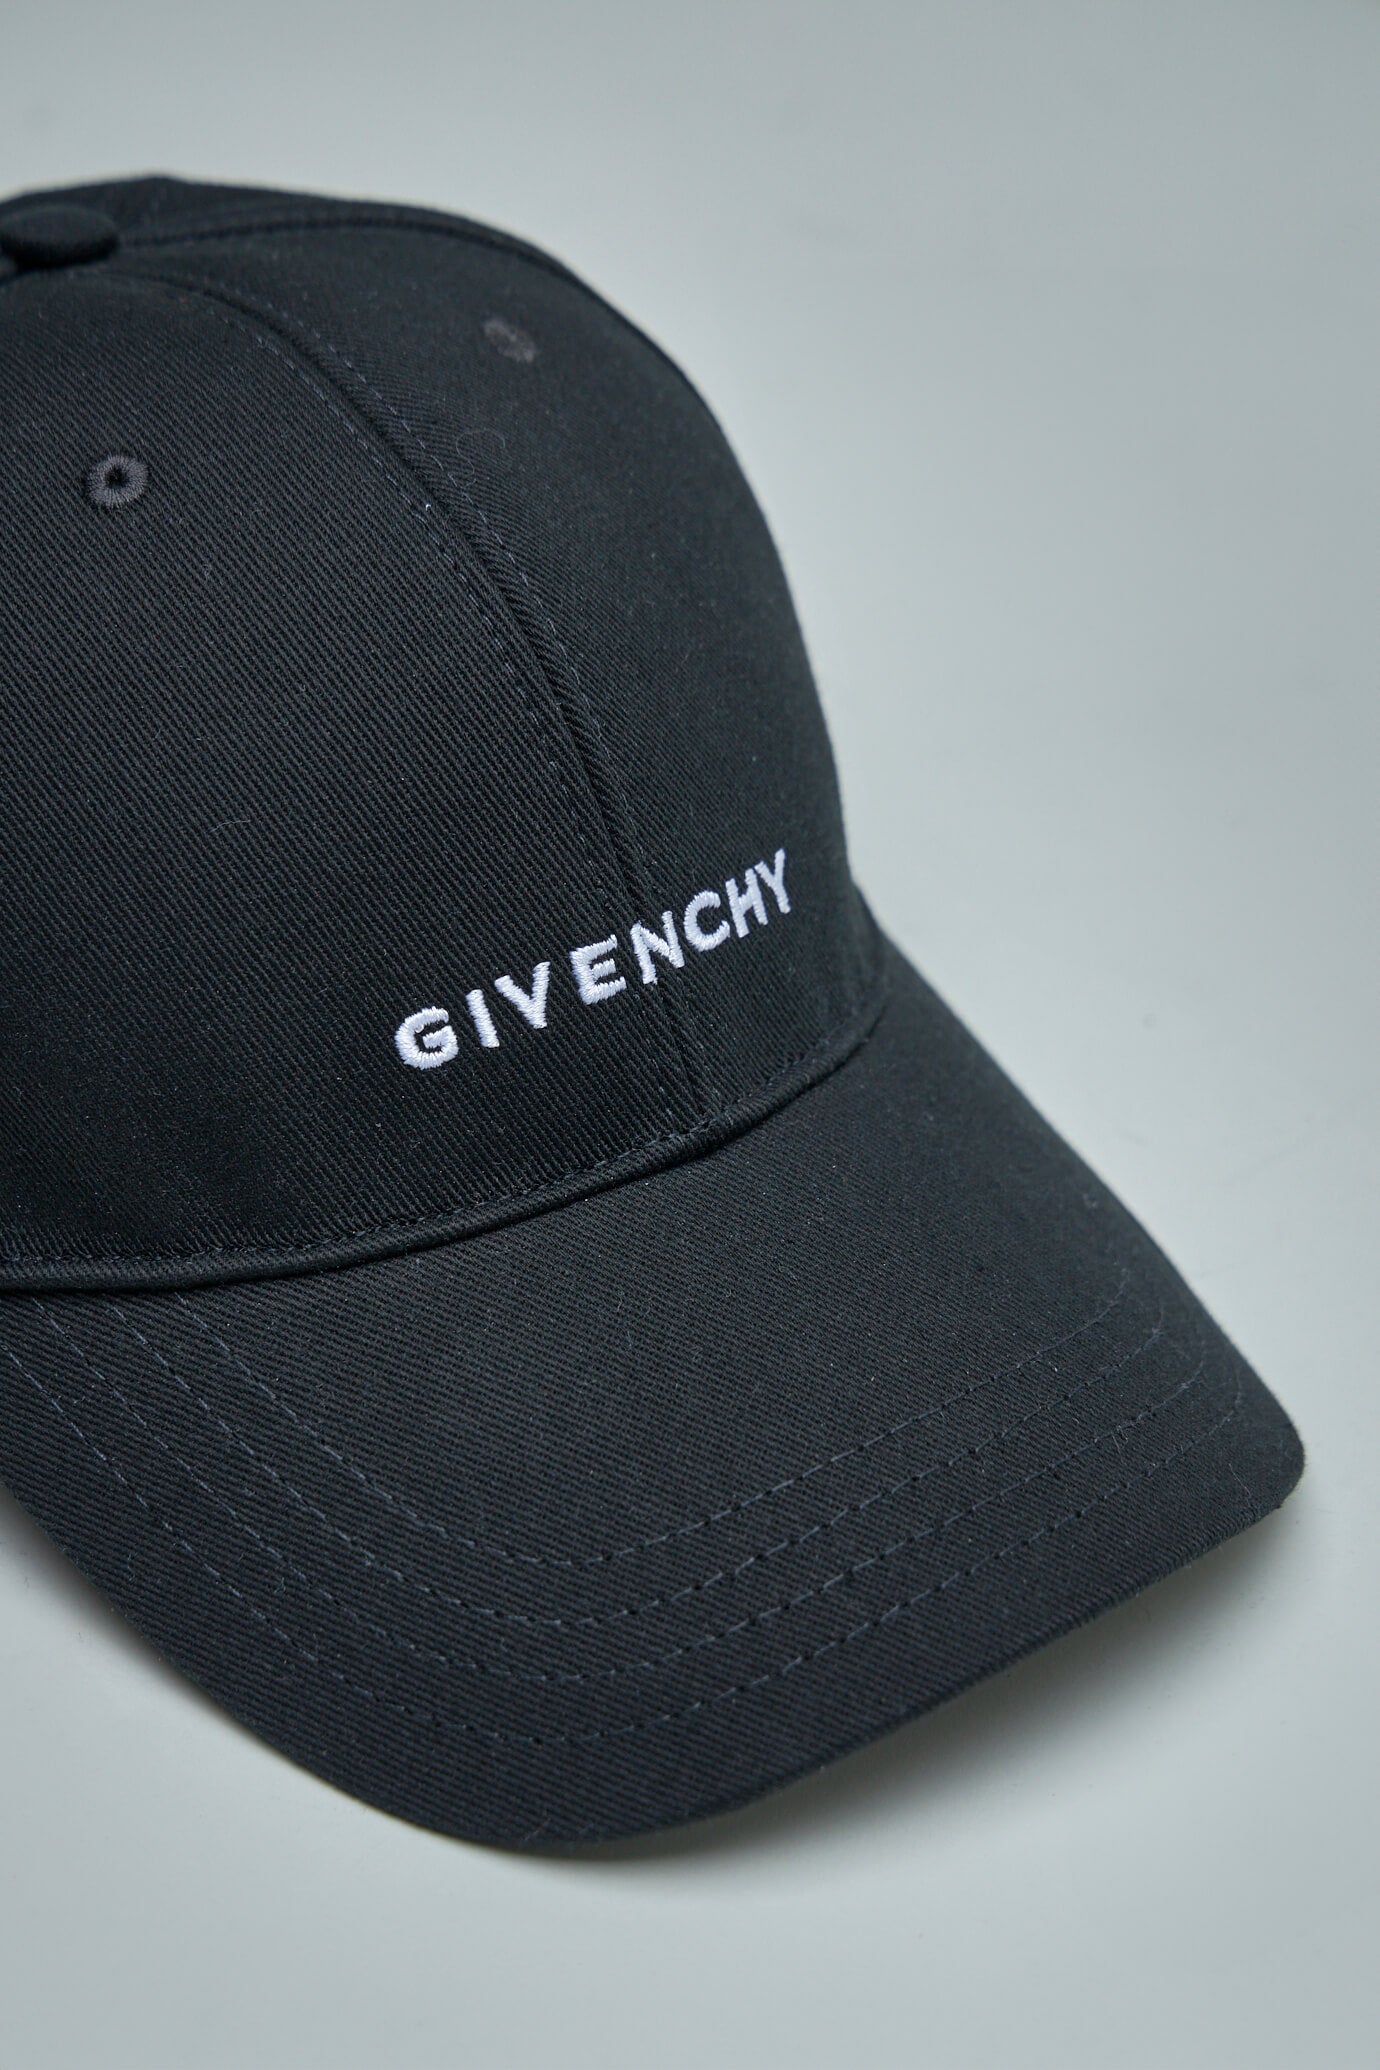 Givenchy Curved Cap W/ Logo black – LABELS